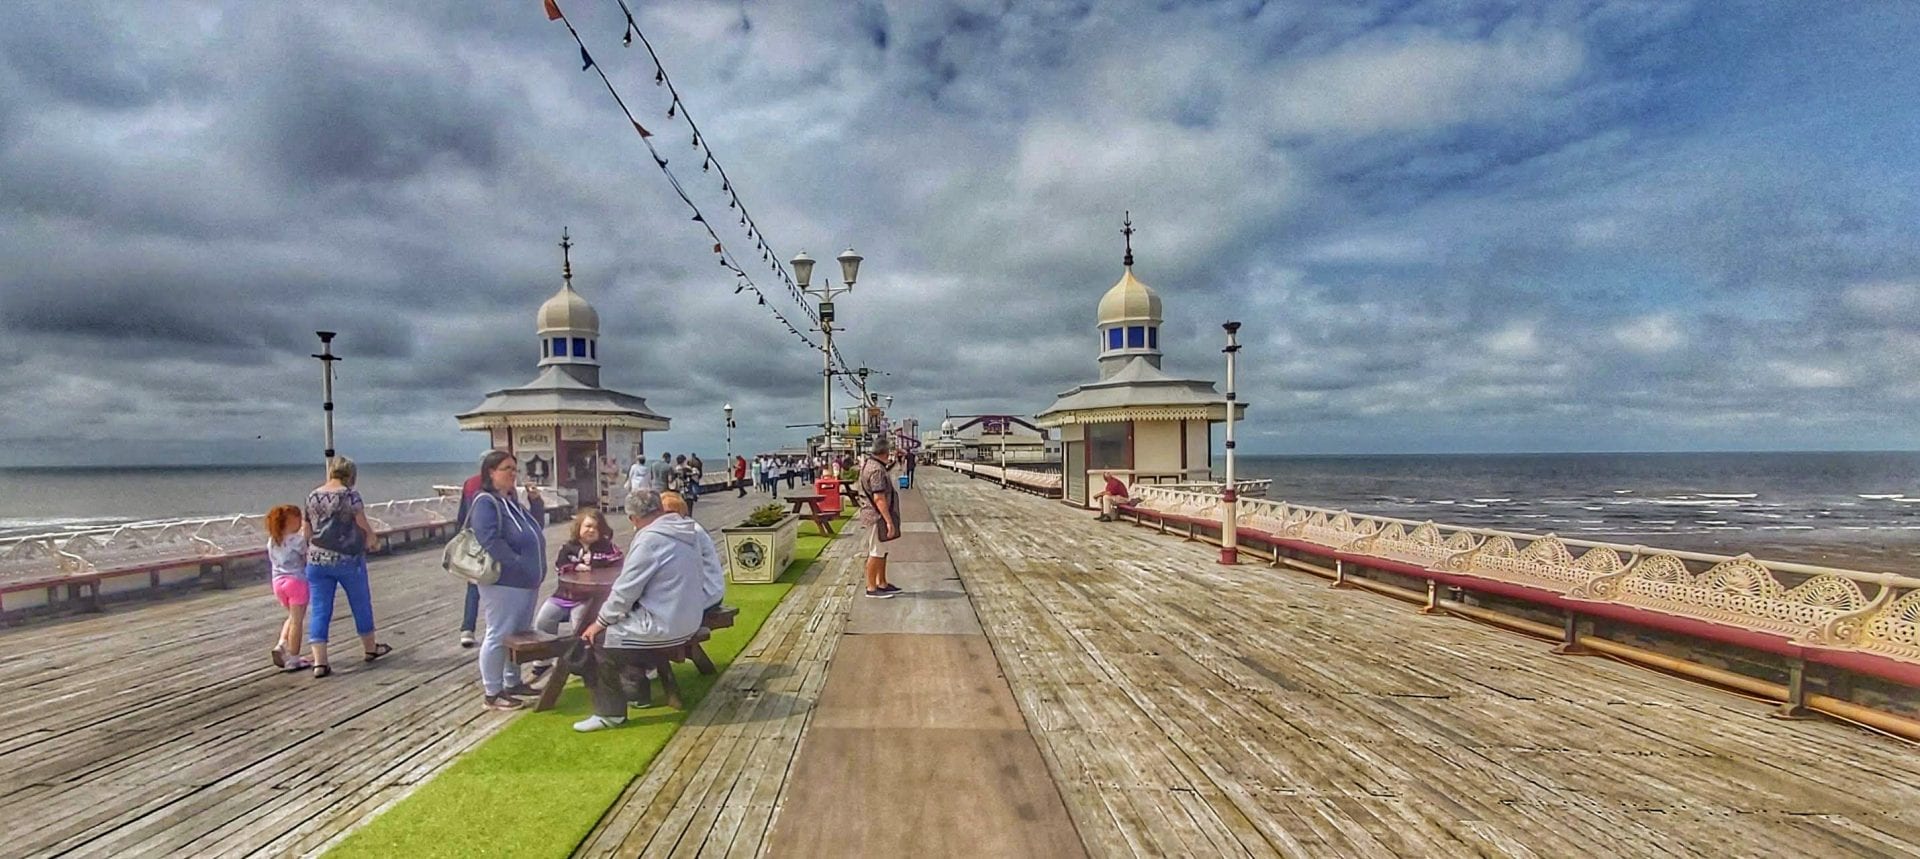 On the Pier by Ged Docherty